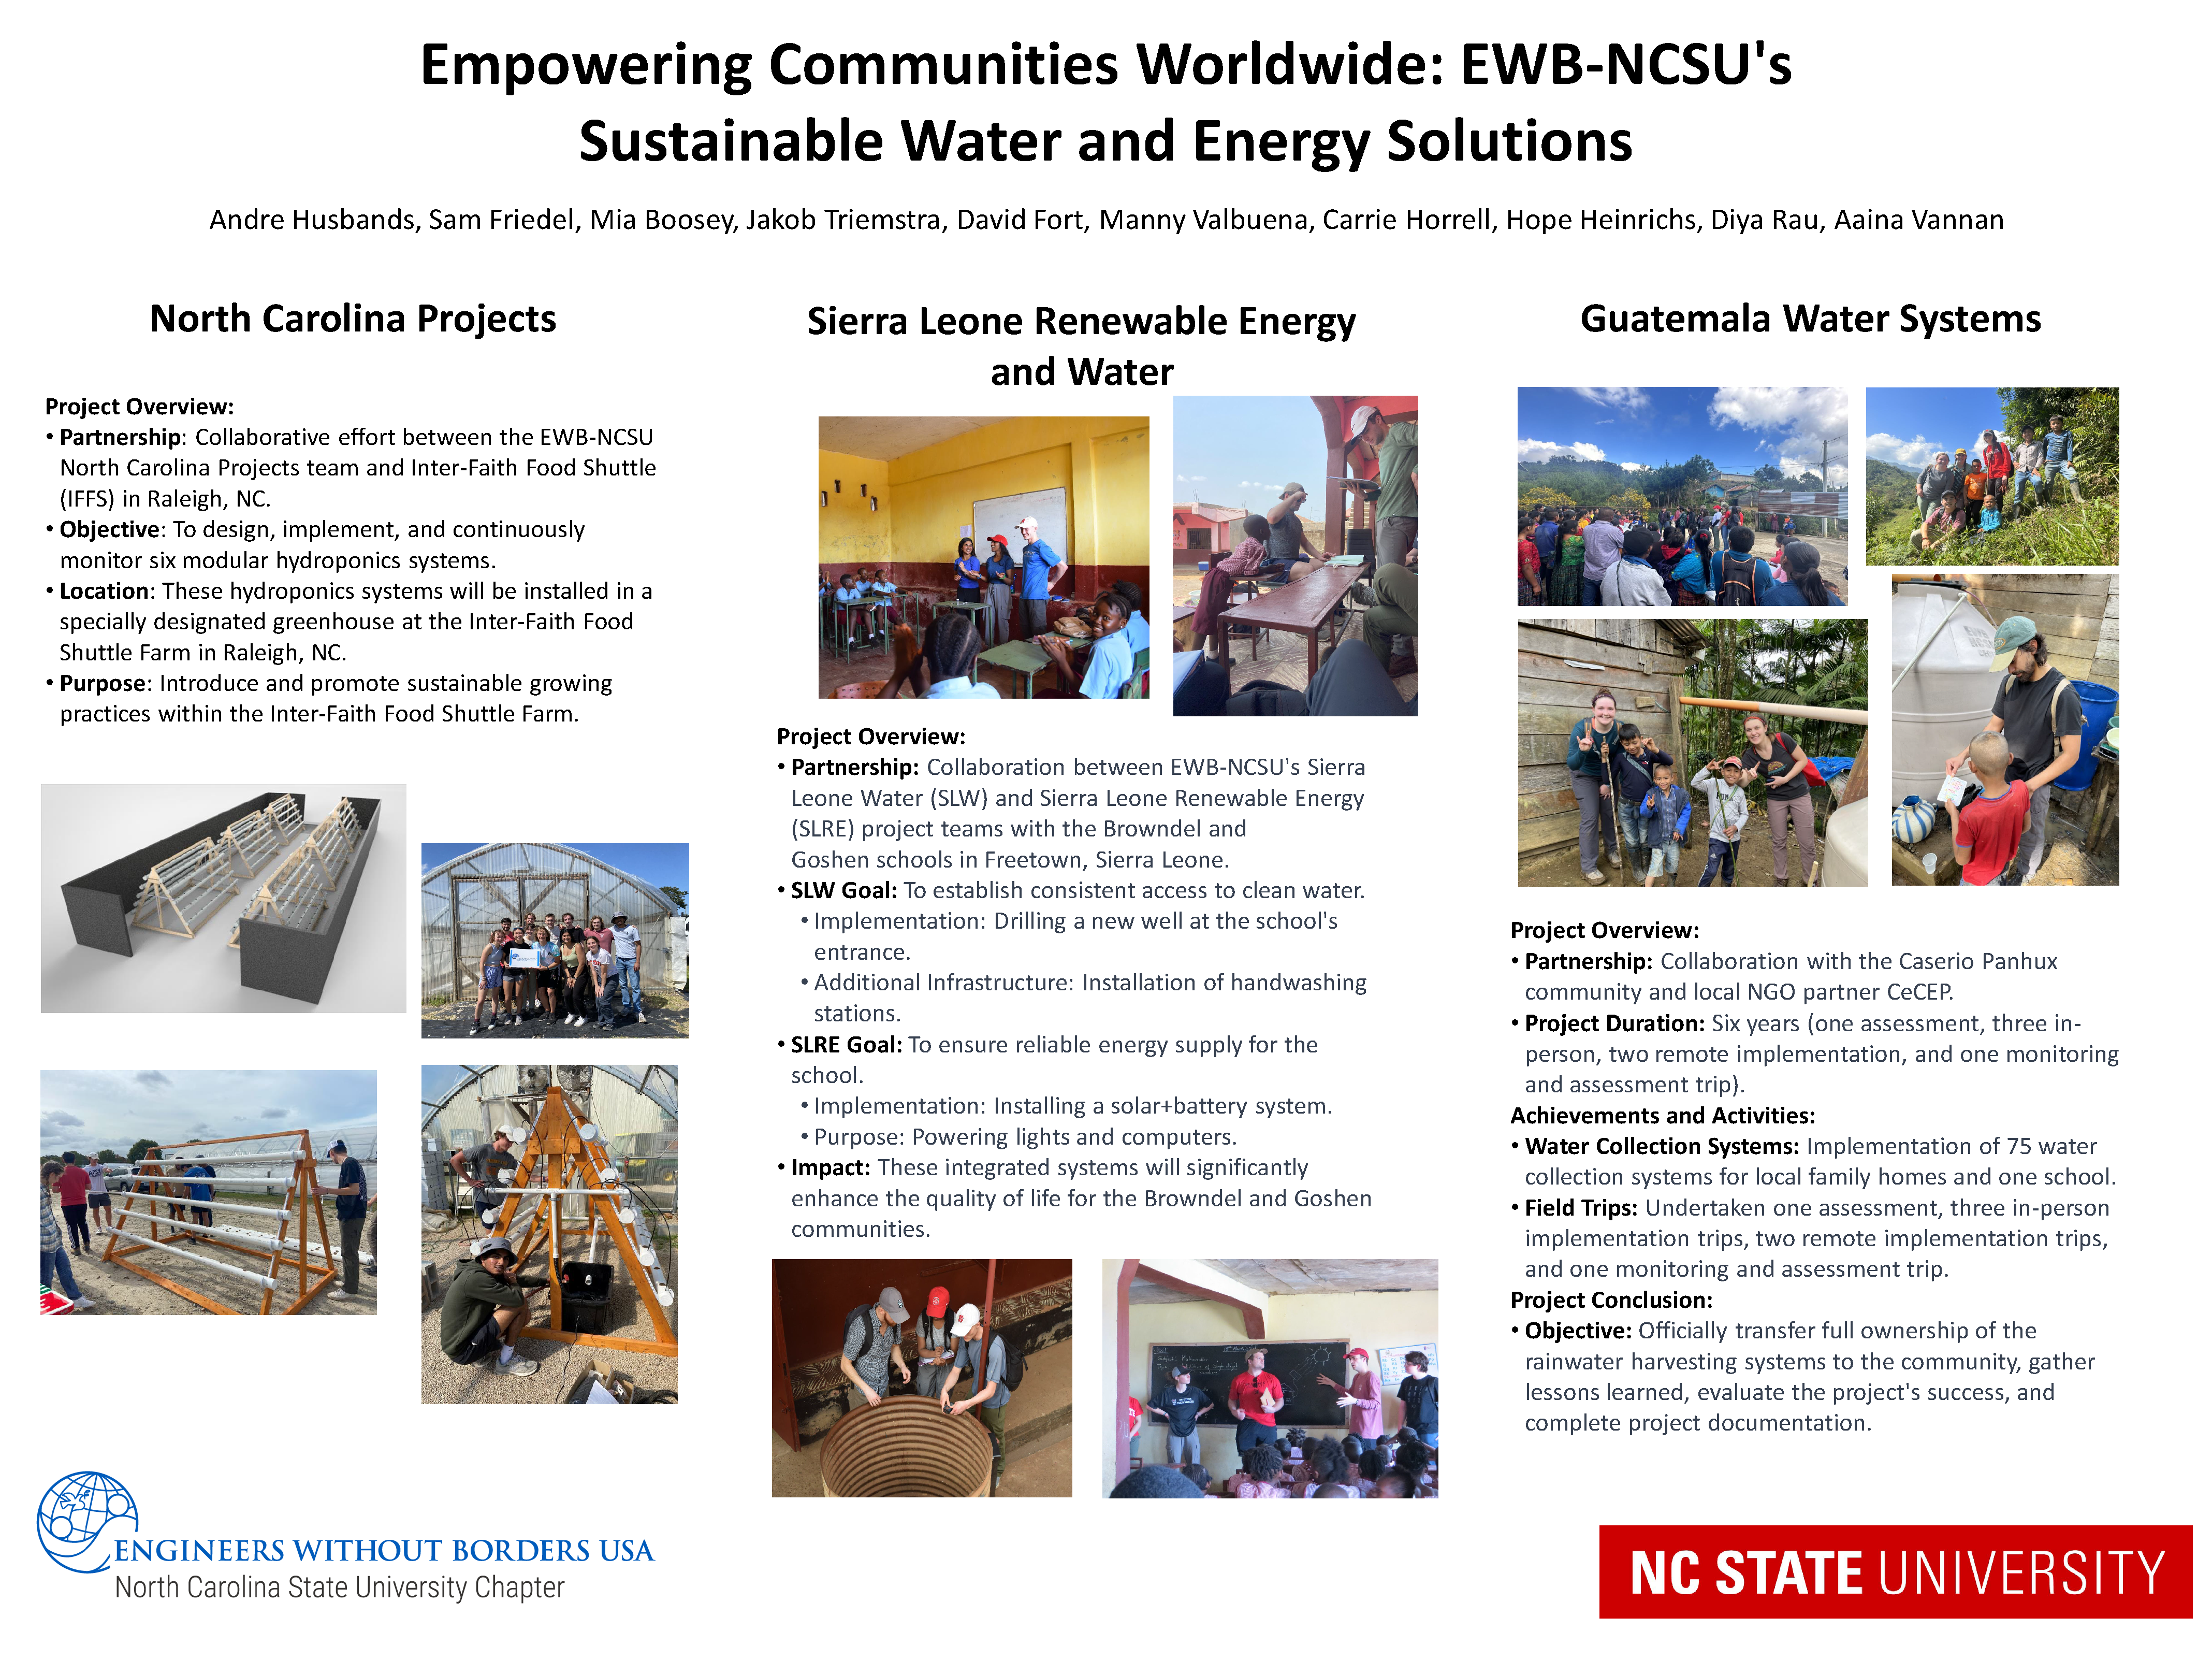 image of Andre Husbands' poster, "Empowering Communities Worldwide: EWB-NCSU's Sustainable Water and Energy Solutions"